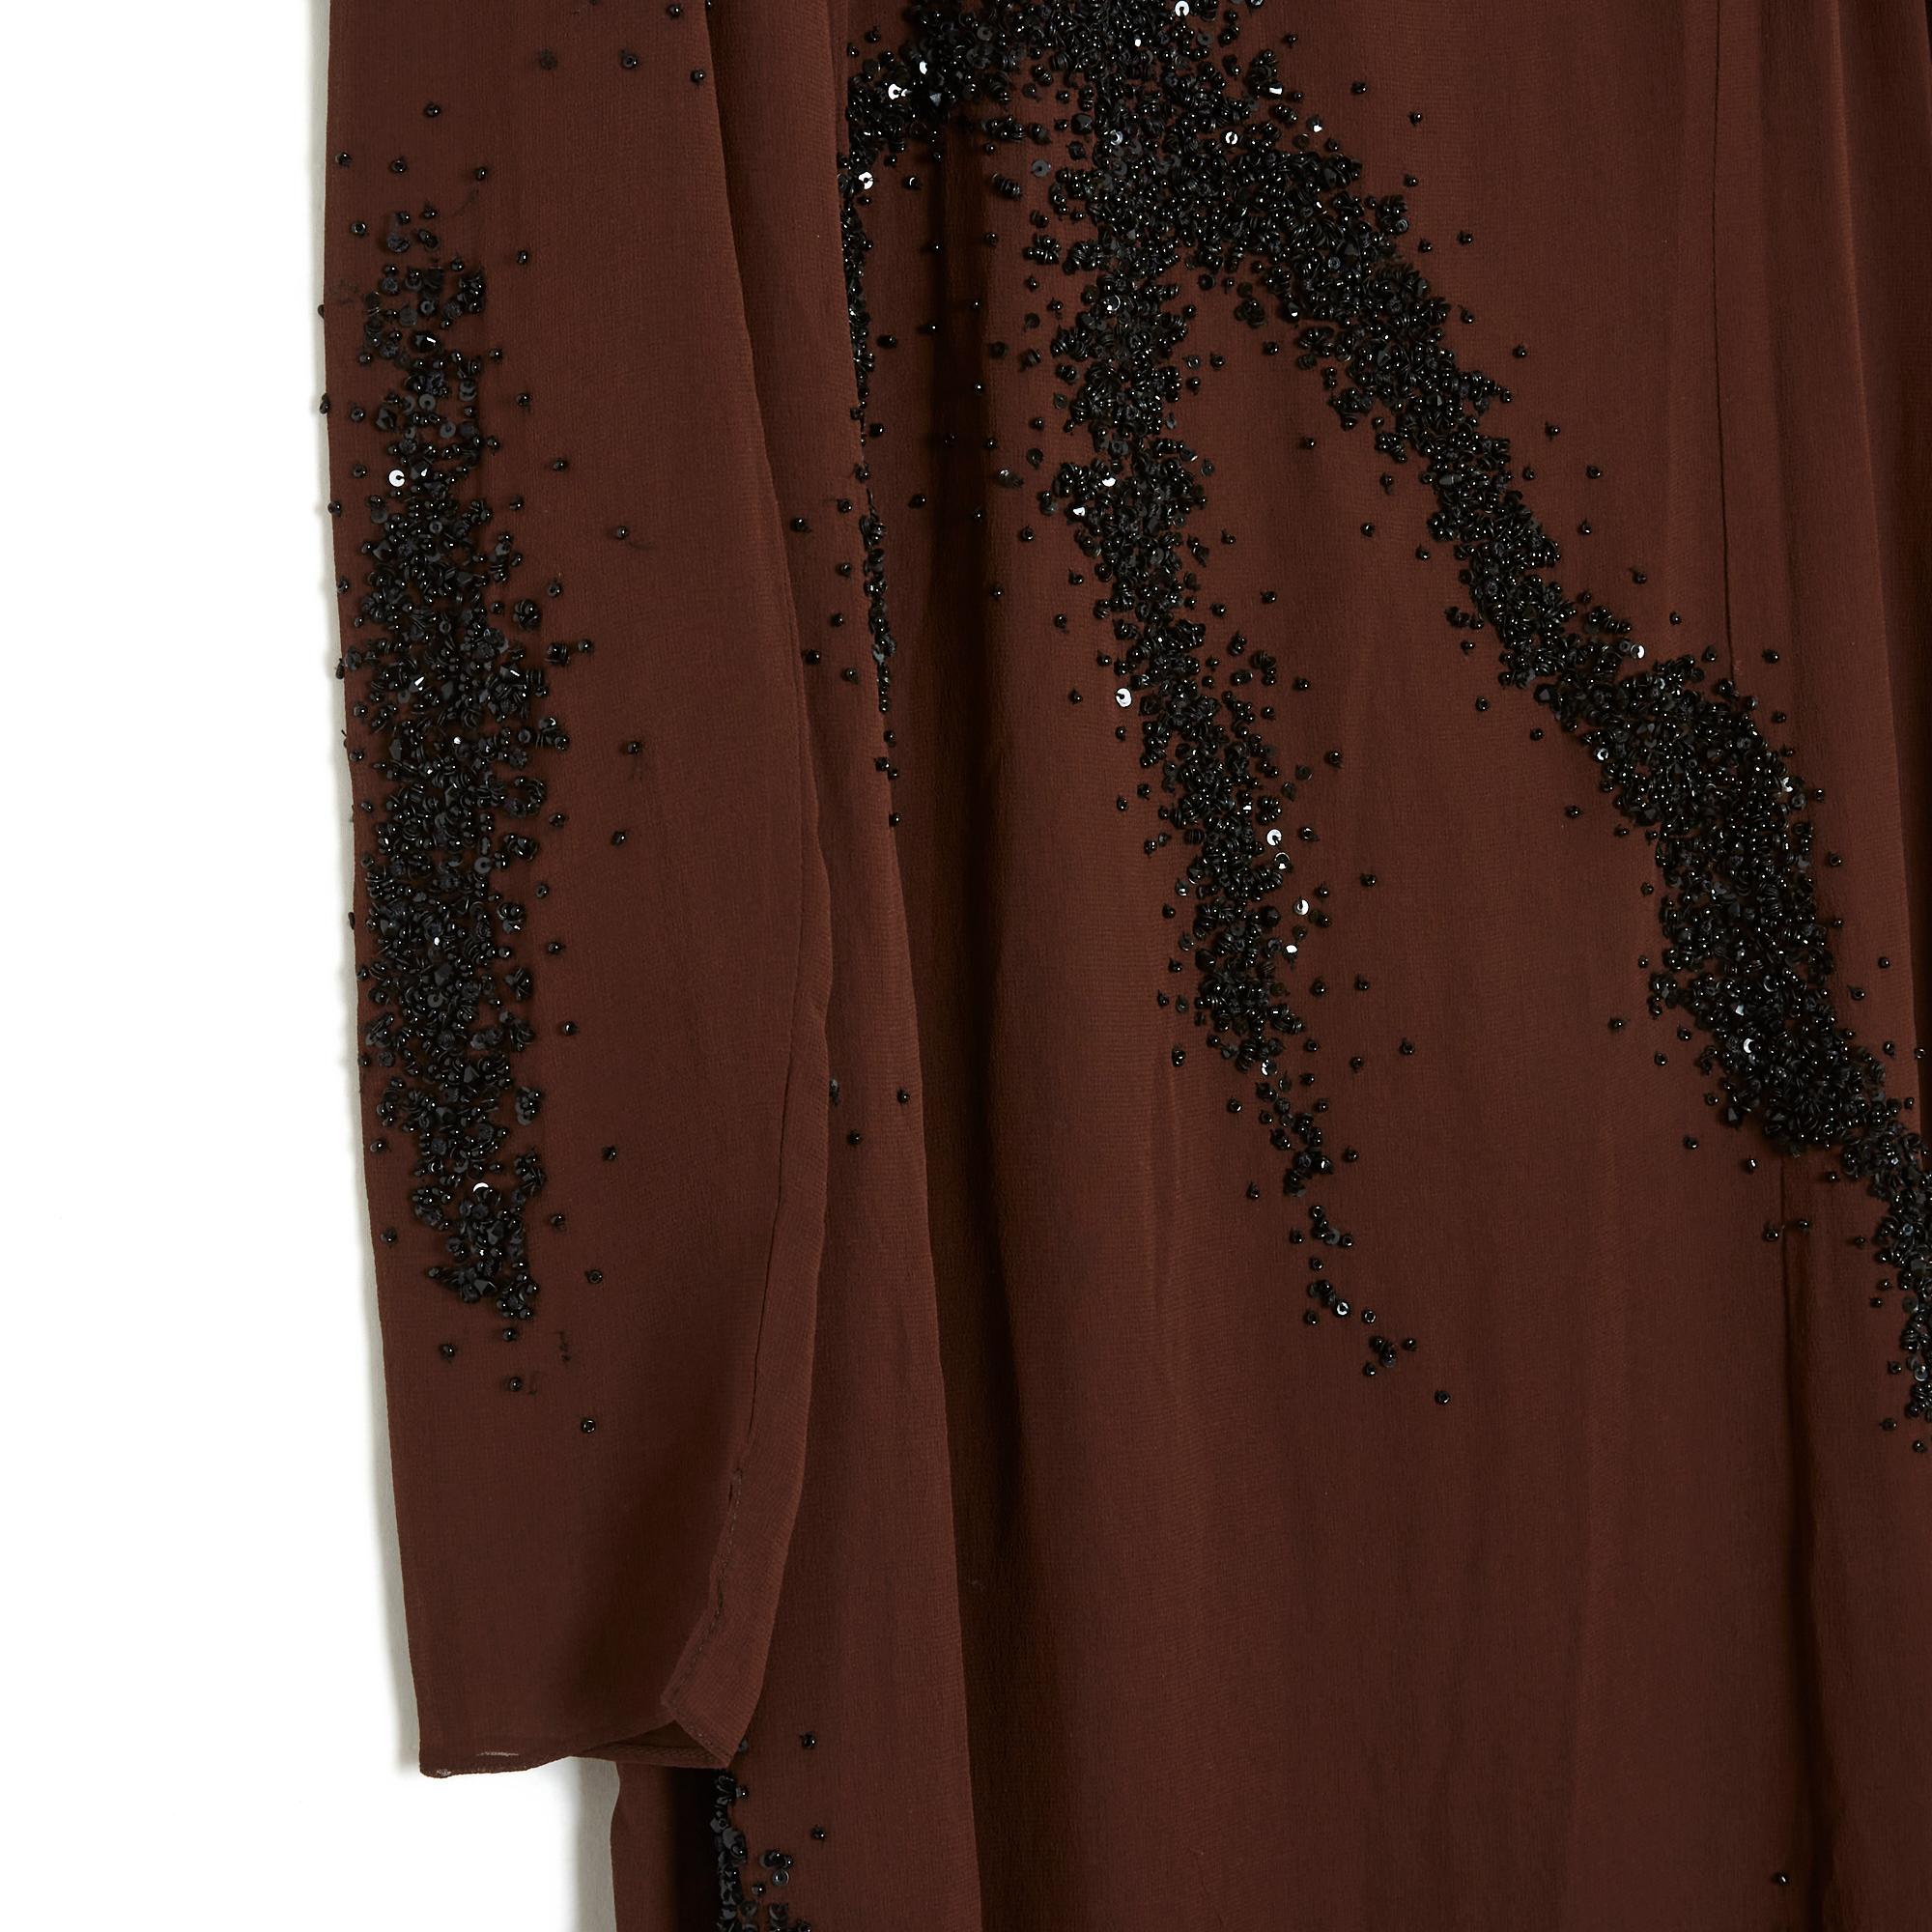 Balmain circa 1990 long dress in brown silk crepe embroidered with black glass beads, asymmetrical collar, long sleeves (unlined, transparent), wrap-around style skirt with an opening on the front, lined with silk crepe on the body, button closure a